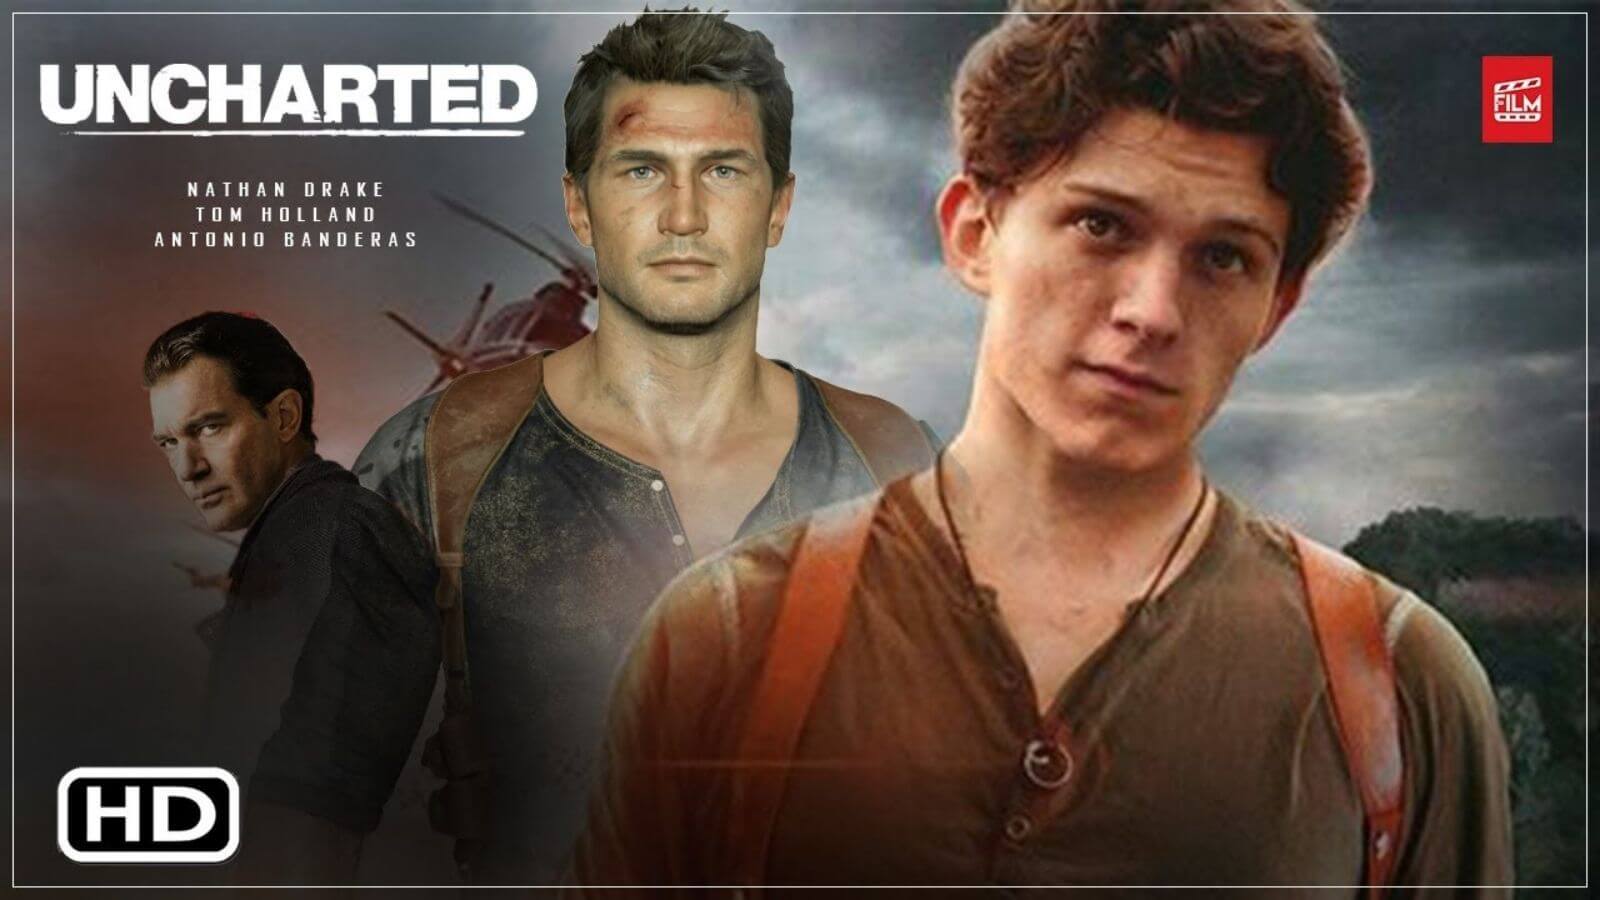 New Uncharted Movie Image Released To Ring In The Year